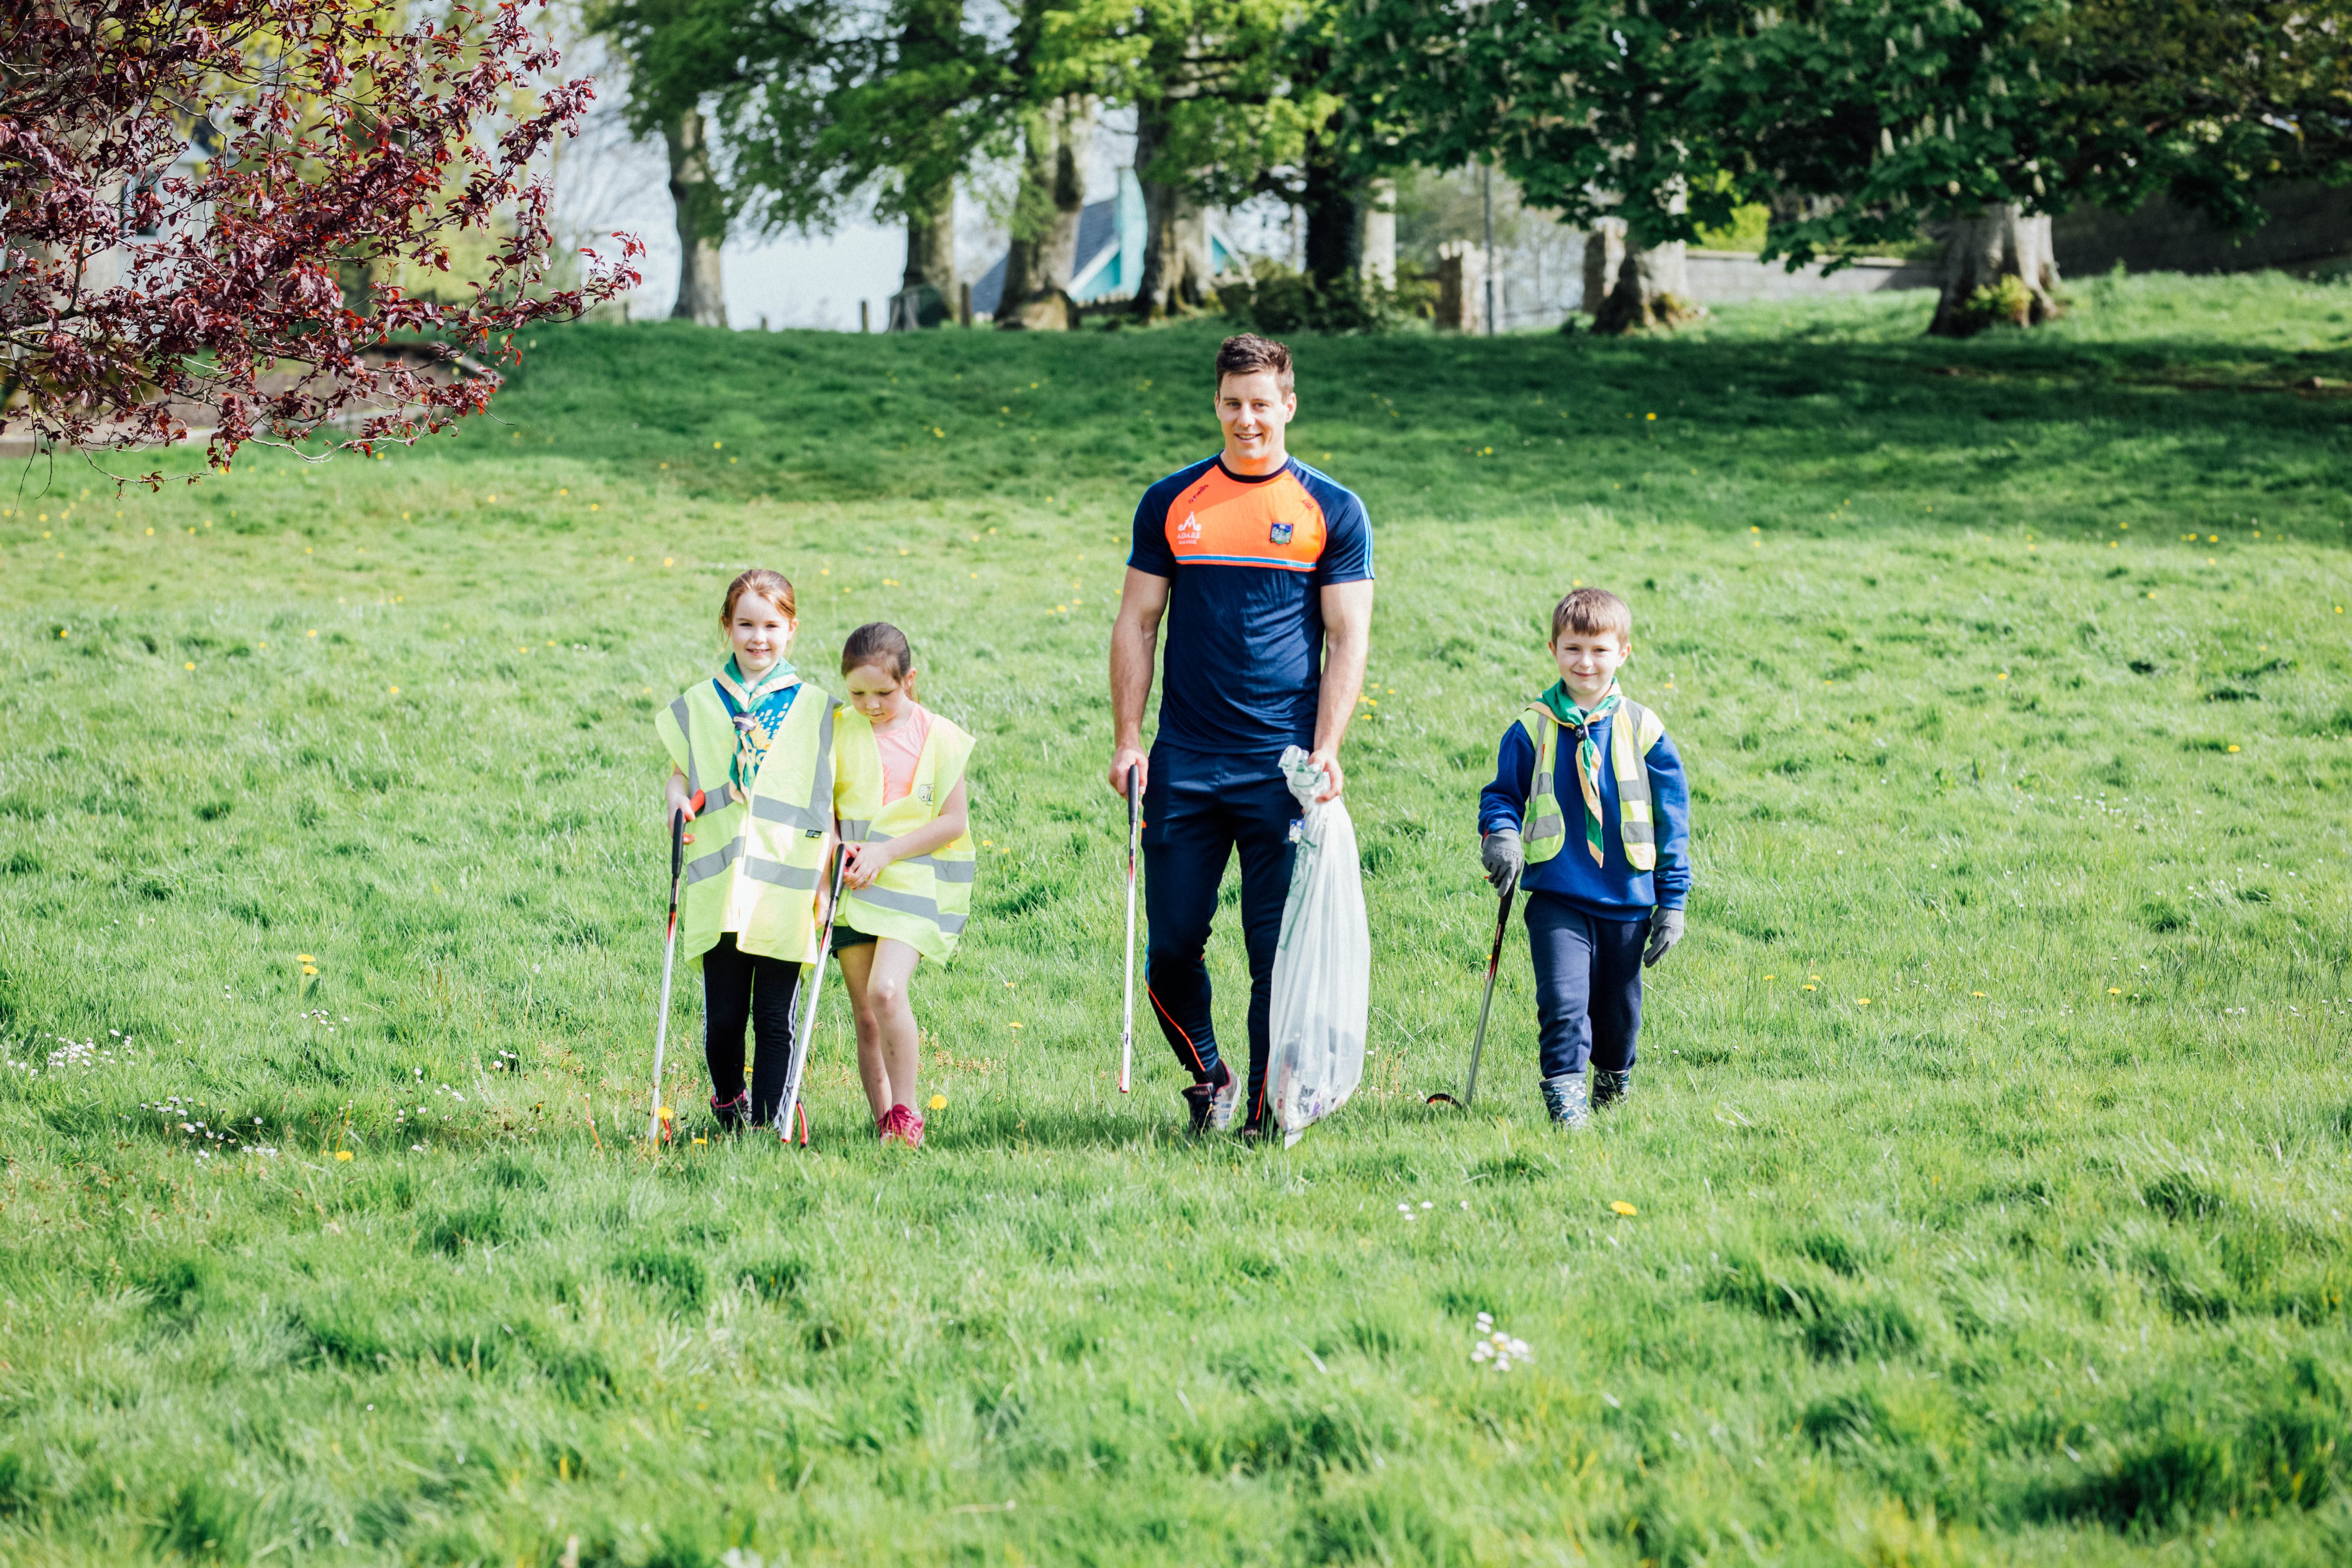 Niamh O Rourke, Emily McNamara and Charlie O Connell with Limerick Hurler Dan Morrissey in Castleconnell pictured as part of the TLC Limerick Clean Up of 2019.
Pic. Brian Arthur